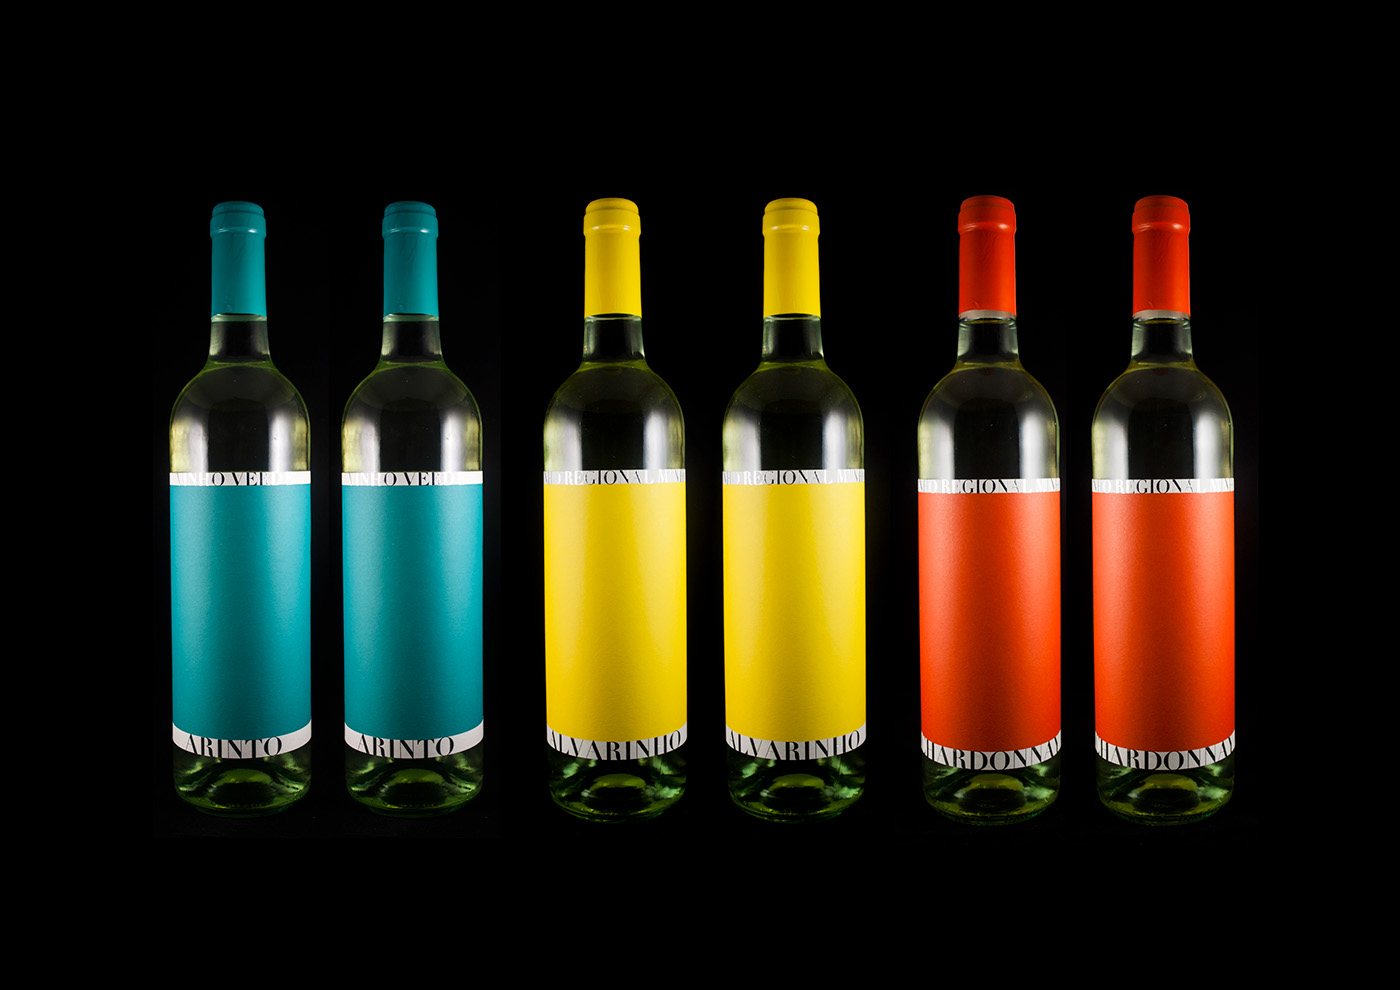 Less is More is in the Roots of this Wine Label Project